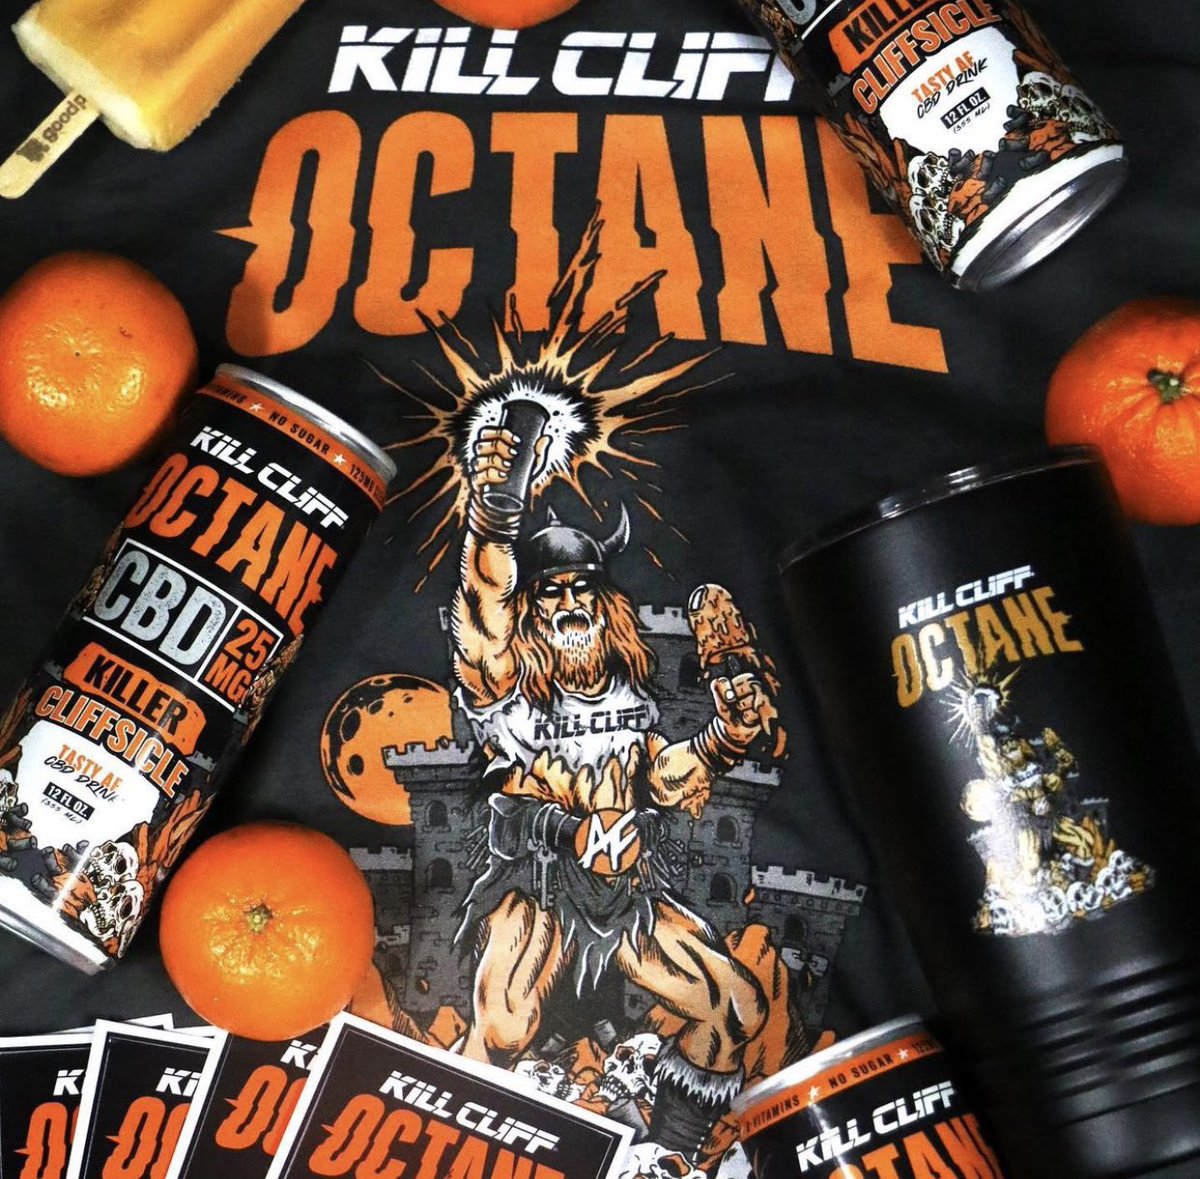 It’s a HIGH OCTANE #FreeCaseFriday! Let us know which flavor you’d prefer in the comments below, 🍋 or 🍊. We’ll pick two winners at random to receive a case of Octane. Bonus points for RTs. Must follow @killcliff. #giveaway